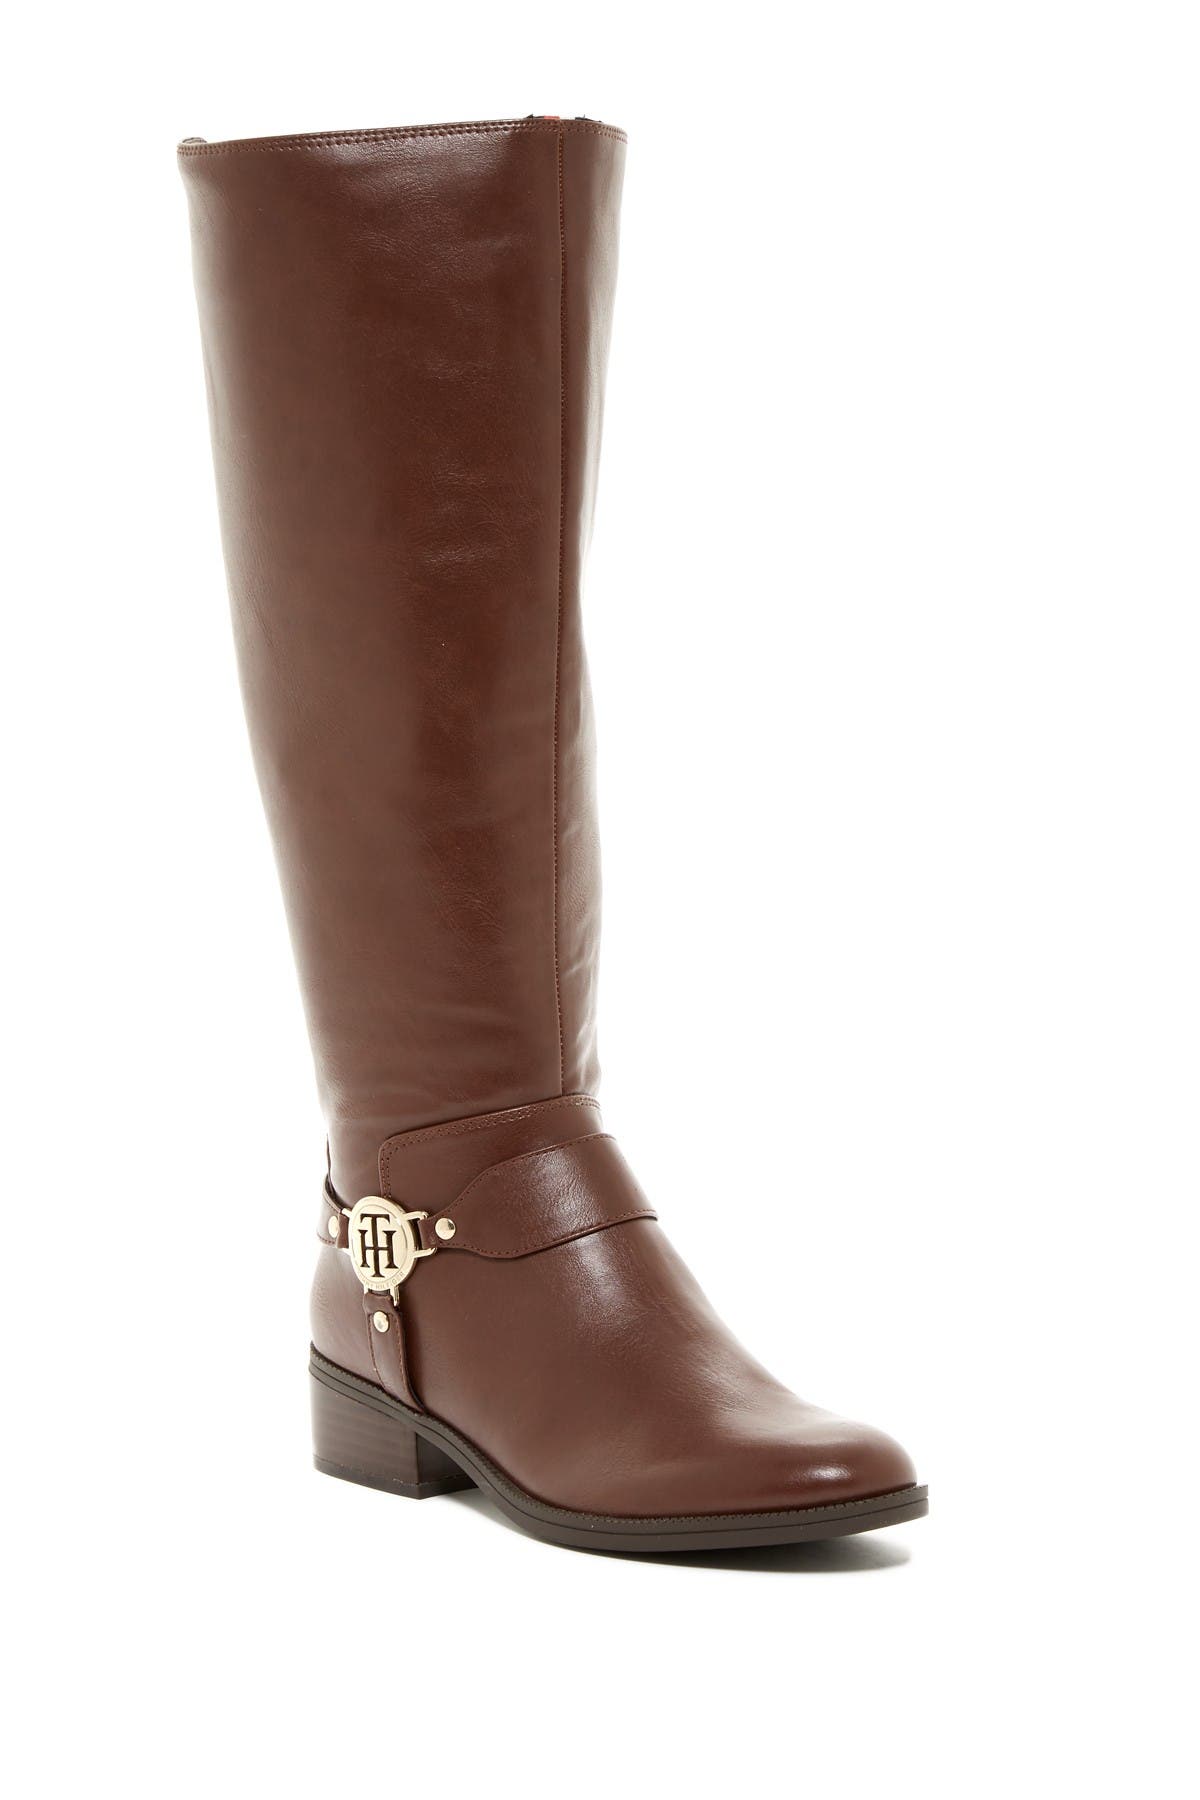 Tommy Hilfiger | Geneo Tall Riding Boot 